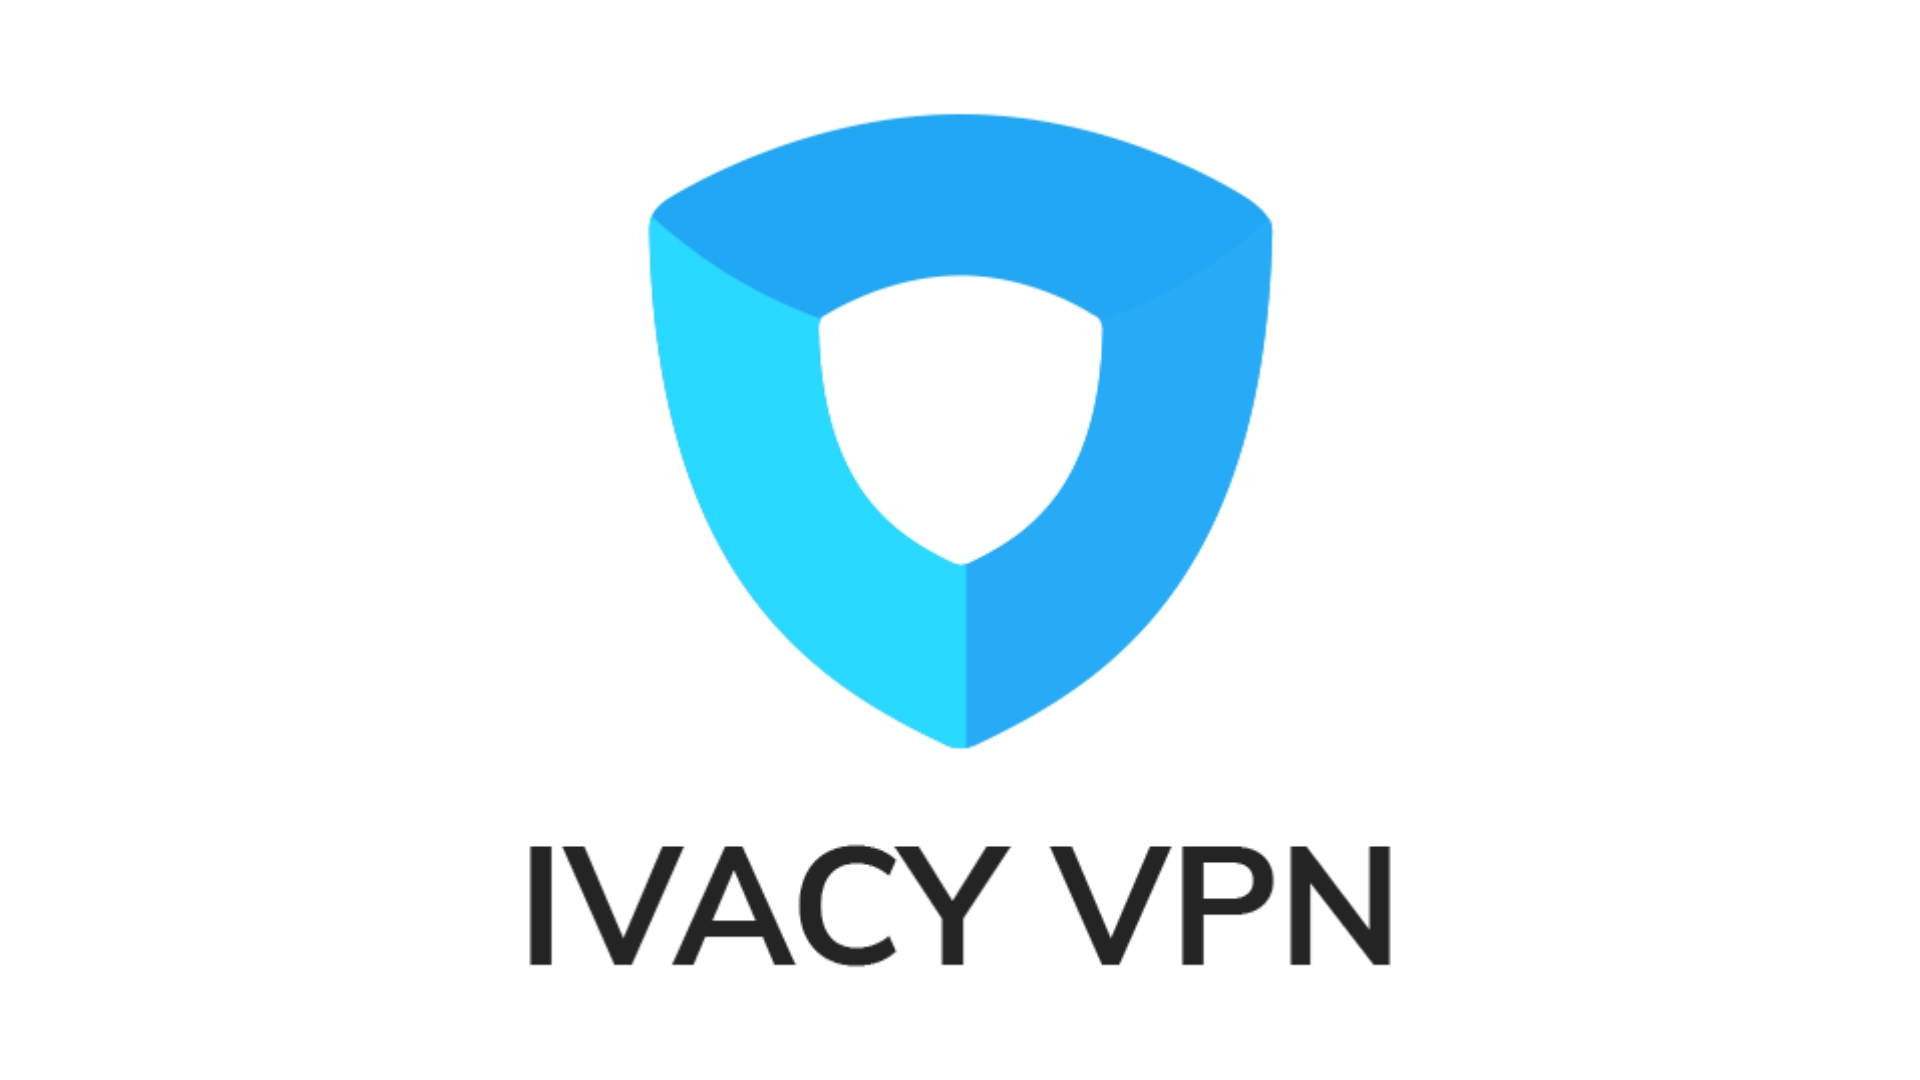 VPN servers for Ivacy VPN.  The image shows the company logo.